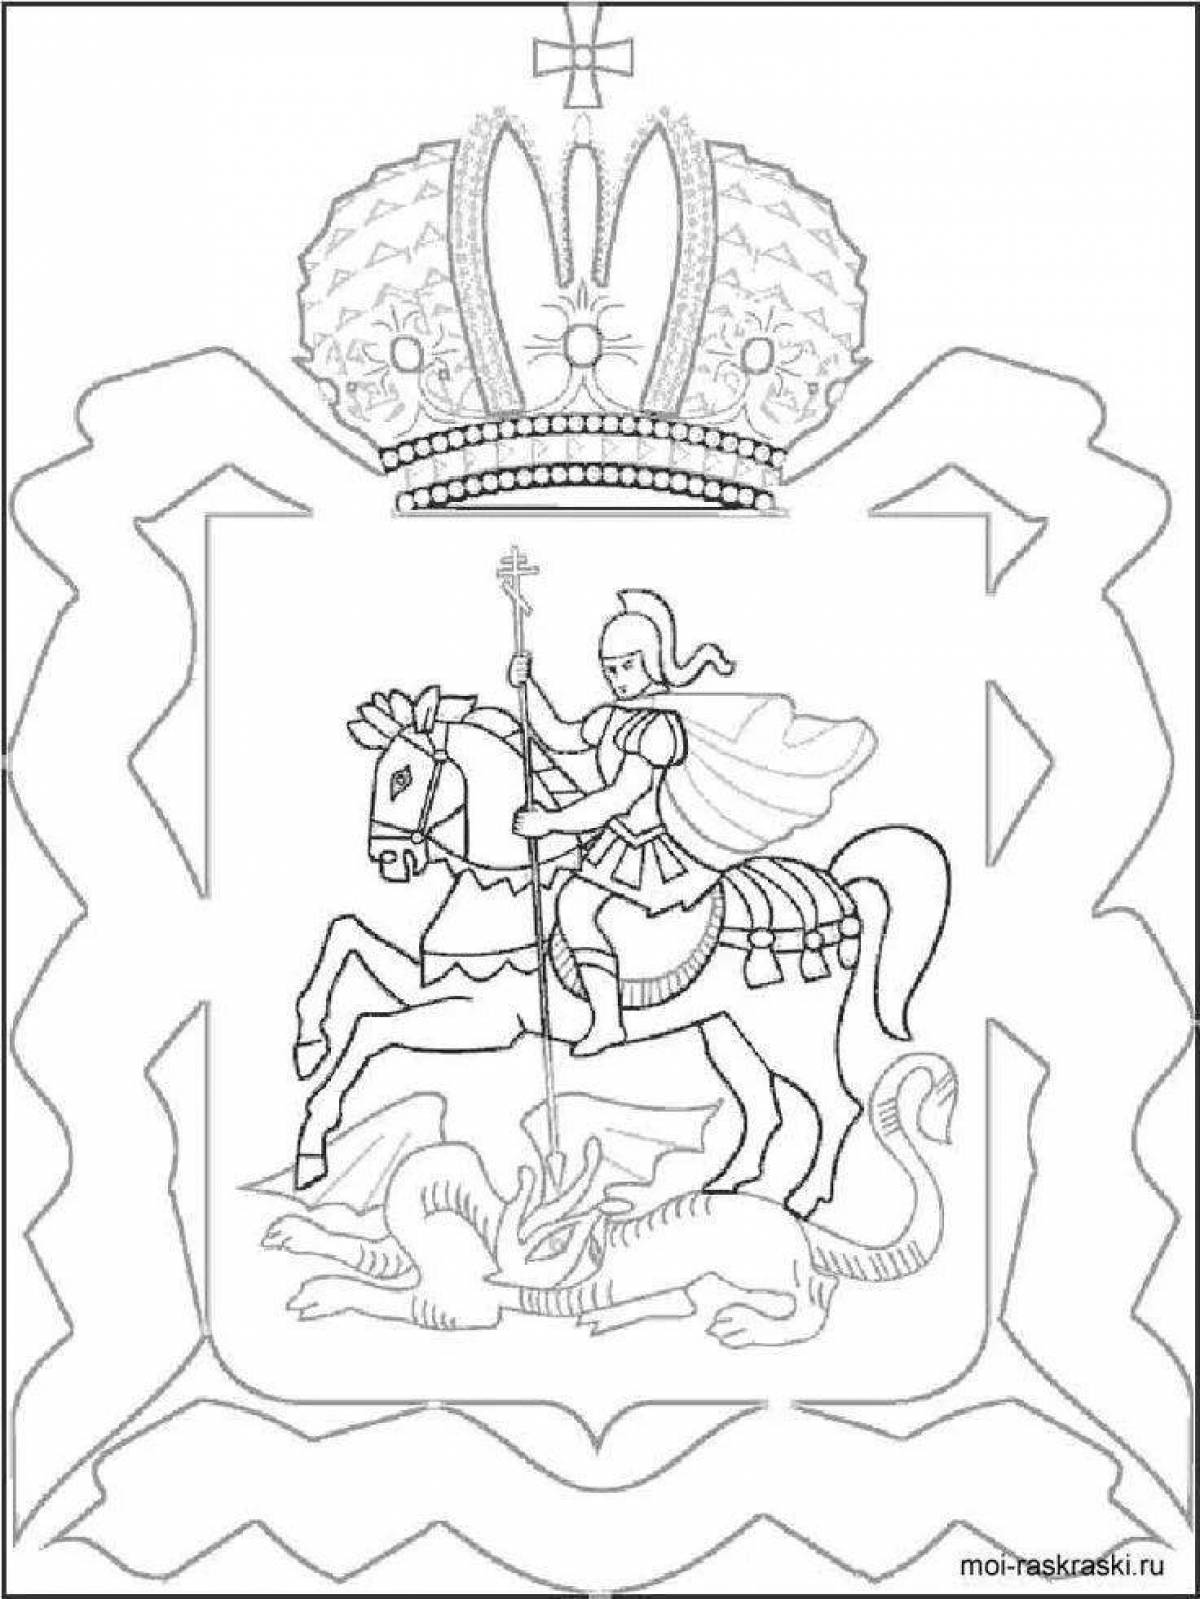 Glossy coloring coat of arms of moscow